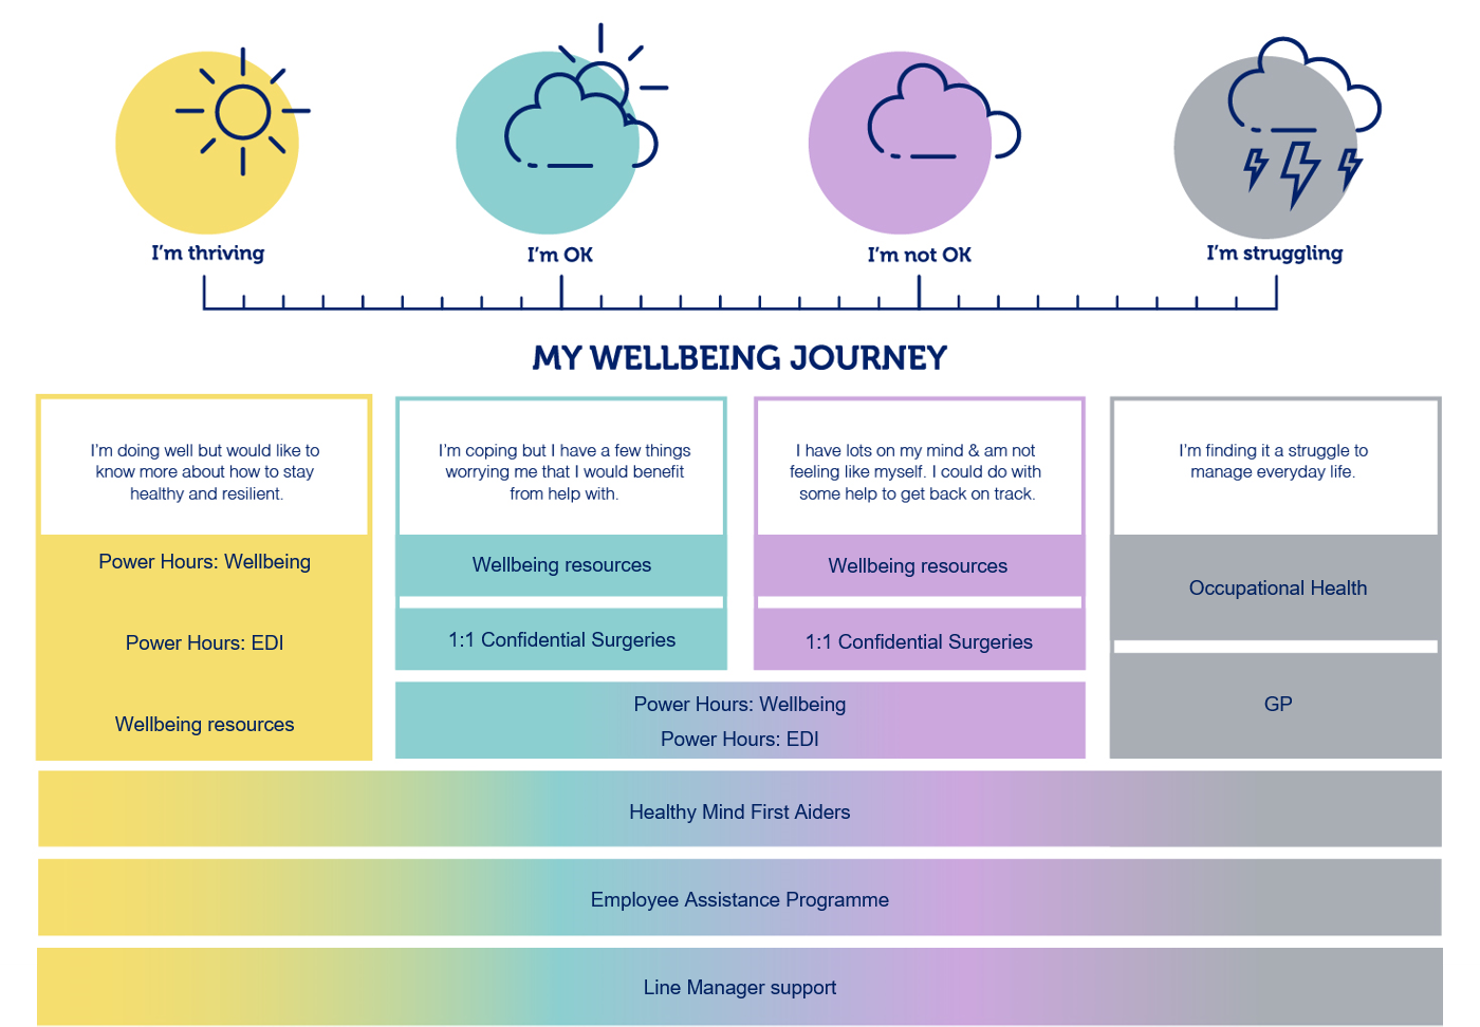 This is a map of our wellbeing journey going from 'i'm thriving' to 'i'm struggling' and how it is dealt with from Mental Health first aiders to  Line Manager support.